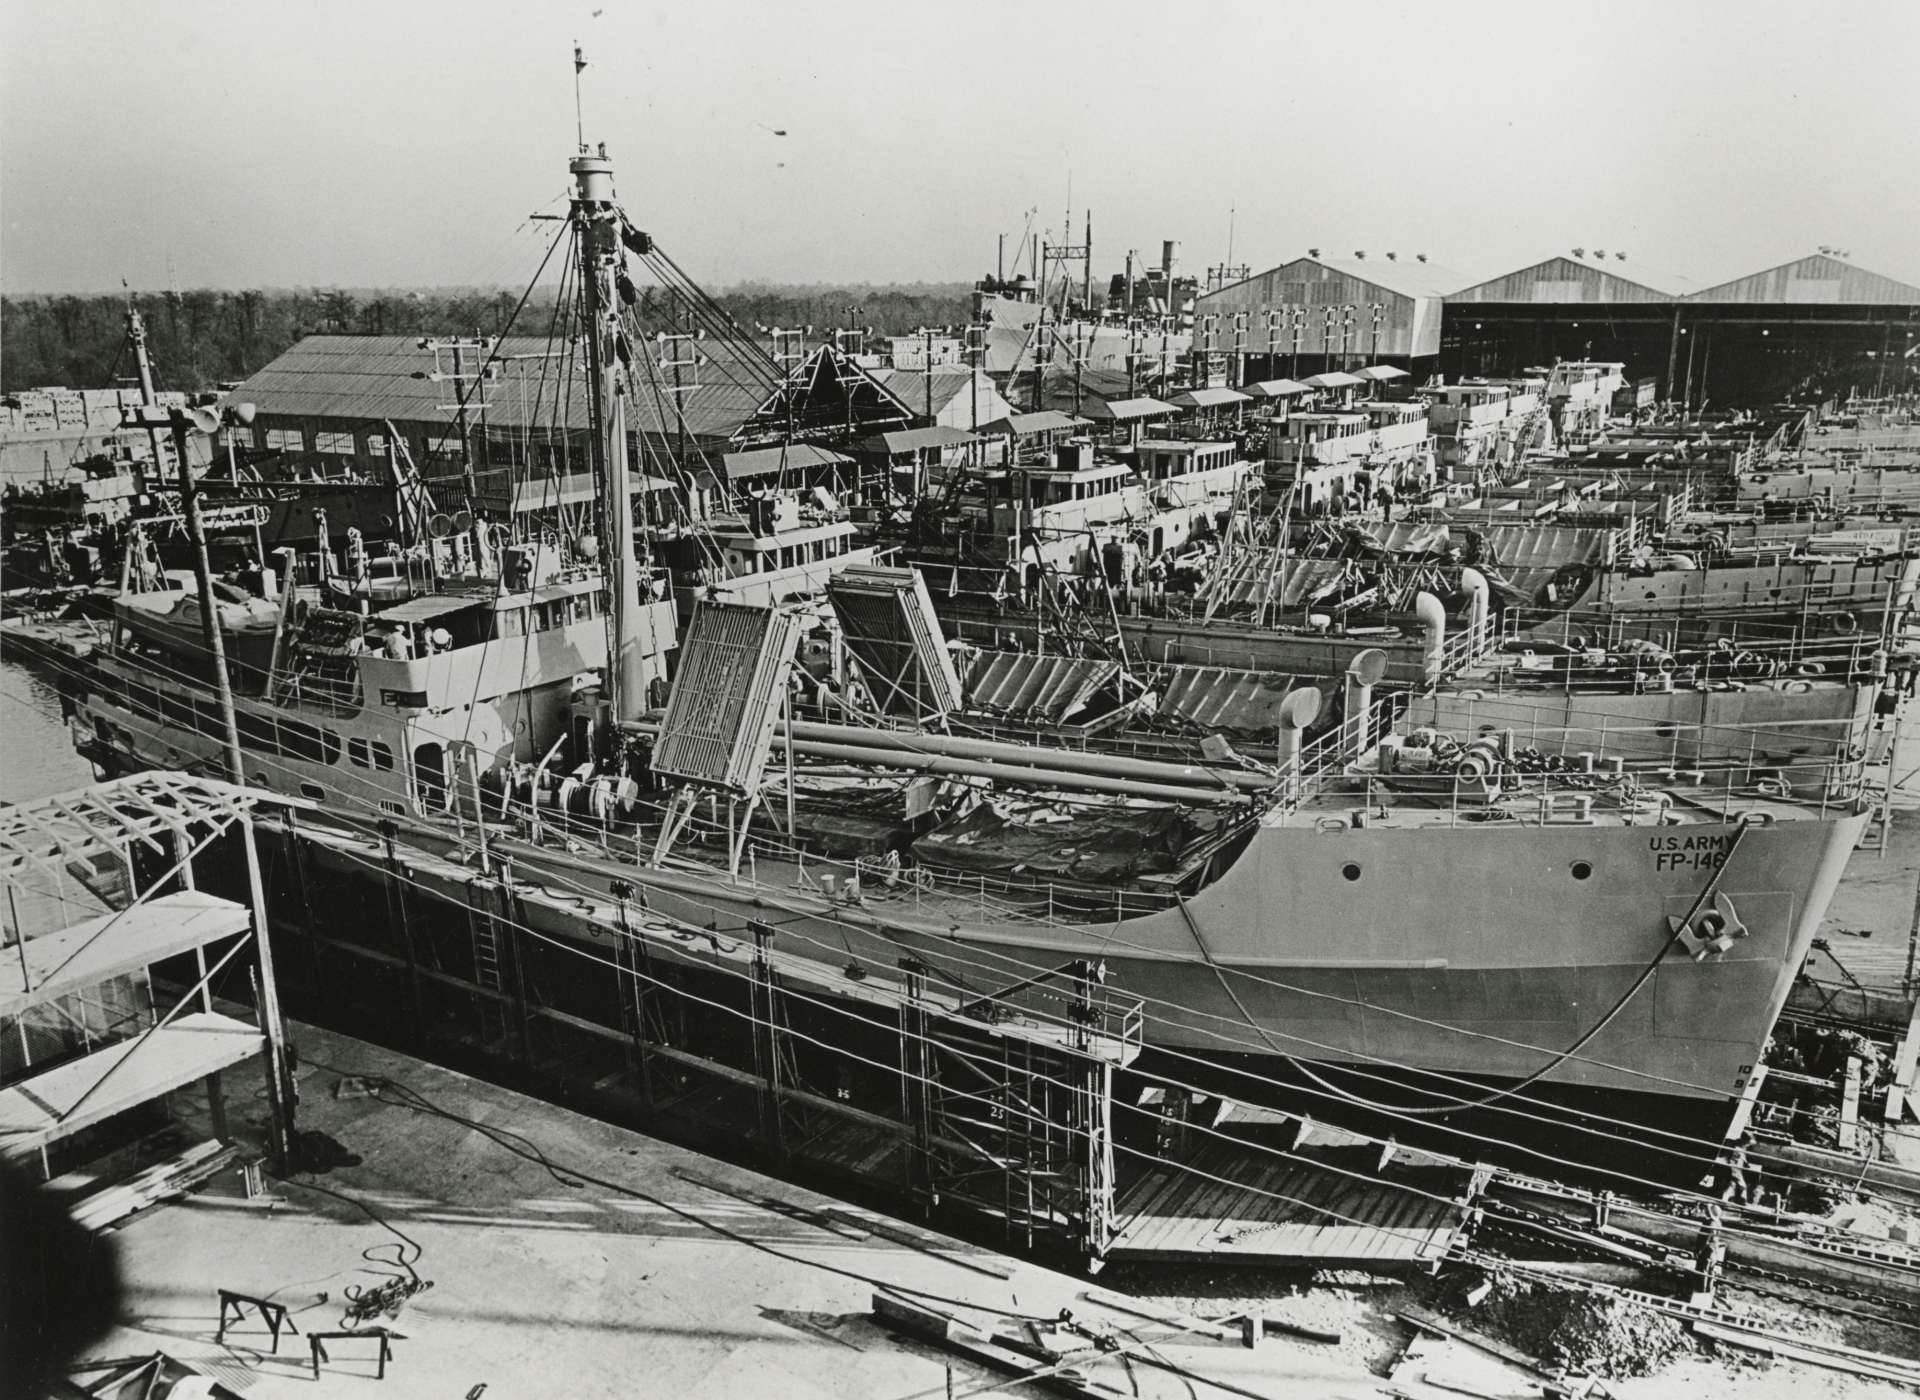 One hundred FP, later designated FS (Freight, Supply) ships, were built at Industrial Canal on a moving assembly line. As each ship reached the end of the line it was launched, stern first, into the Industrial Canal for final testing. In this image, FP-146 is nearing completion and launch.